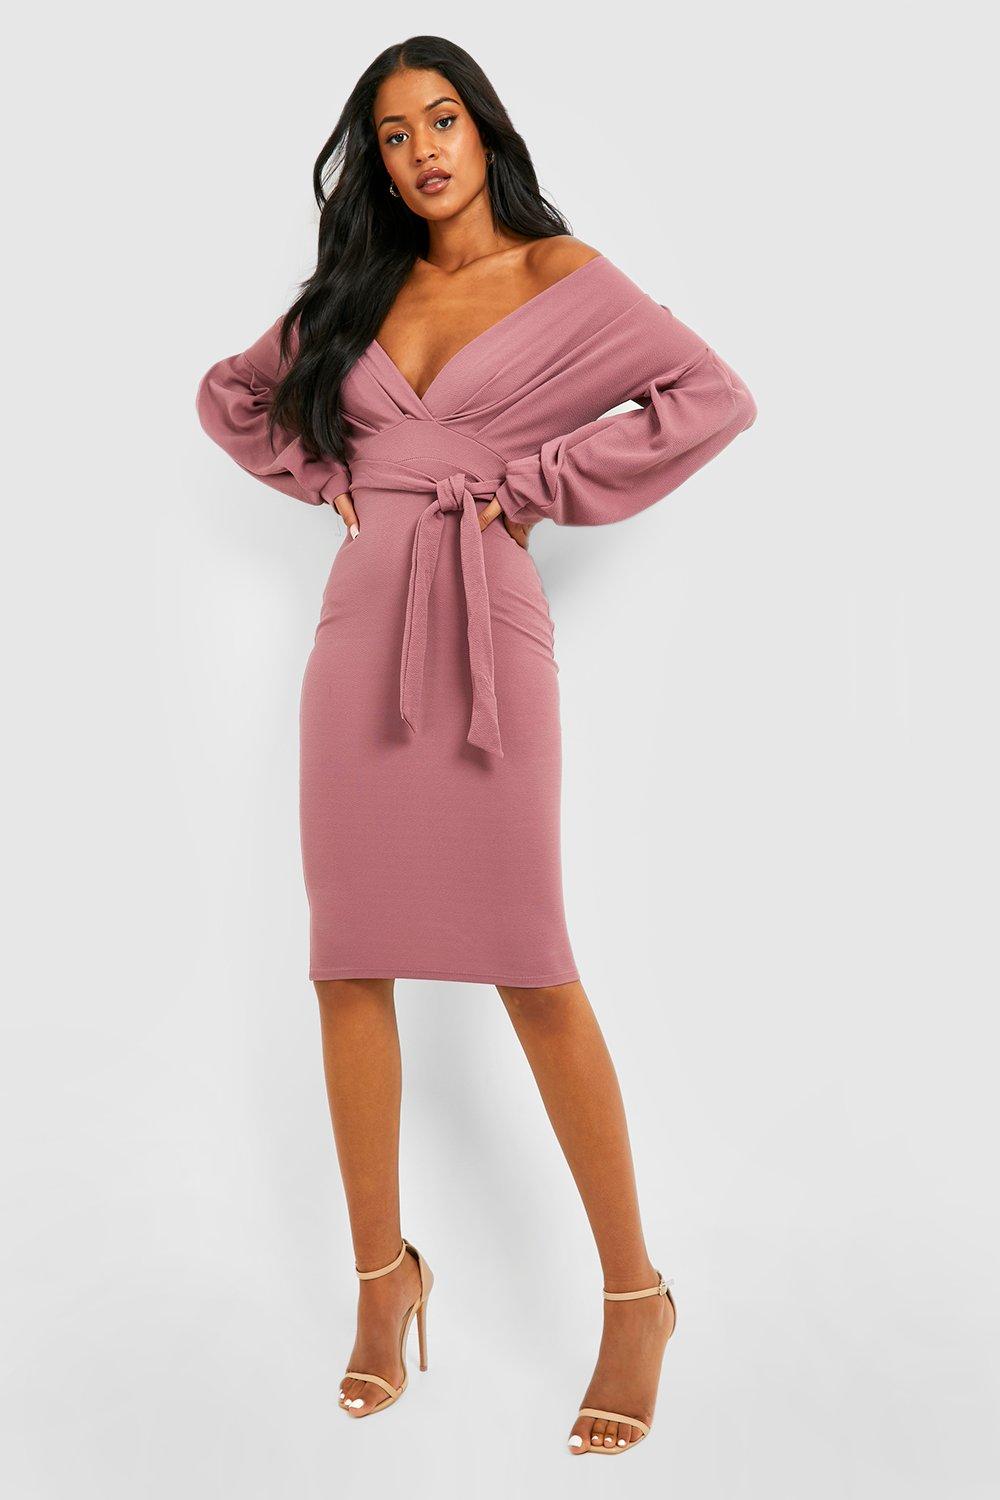 Wrap shoulder off dress the bodycon tall midi exercise for girls